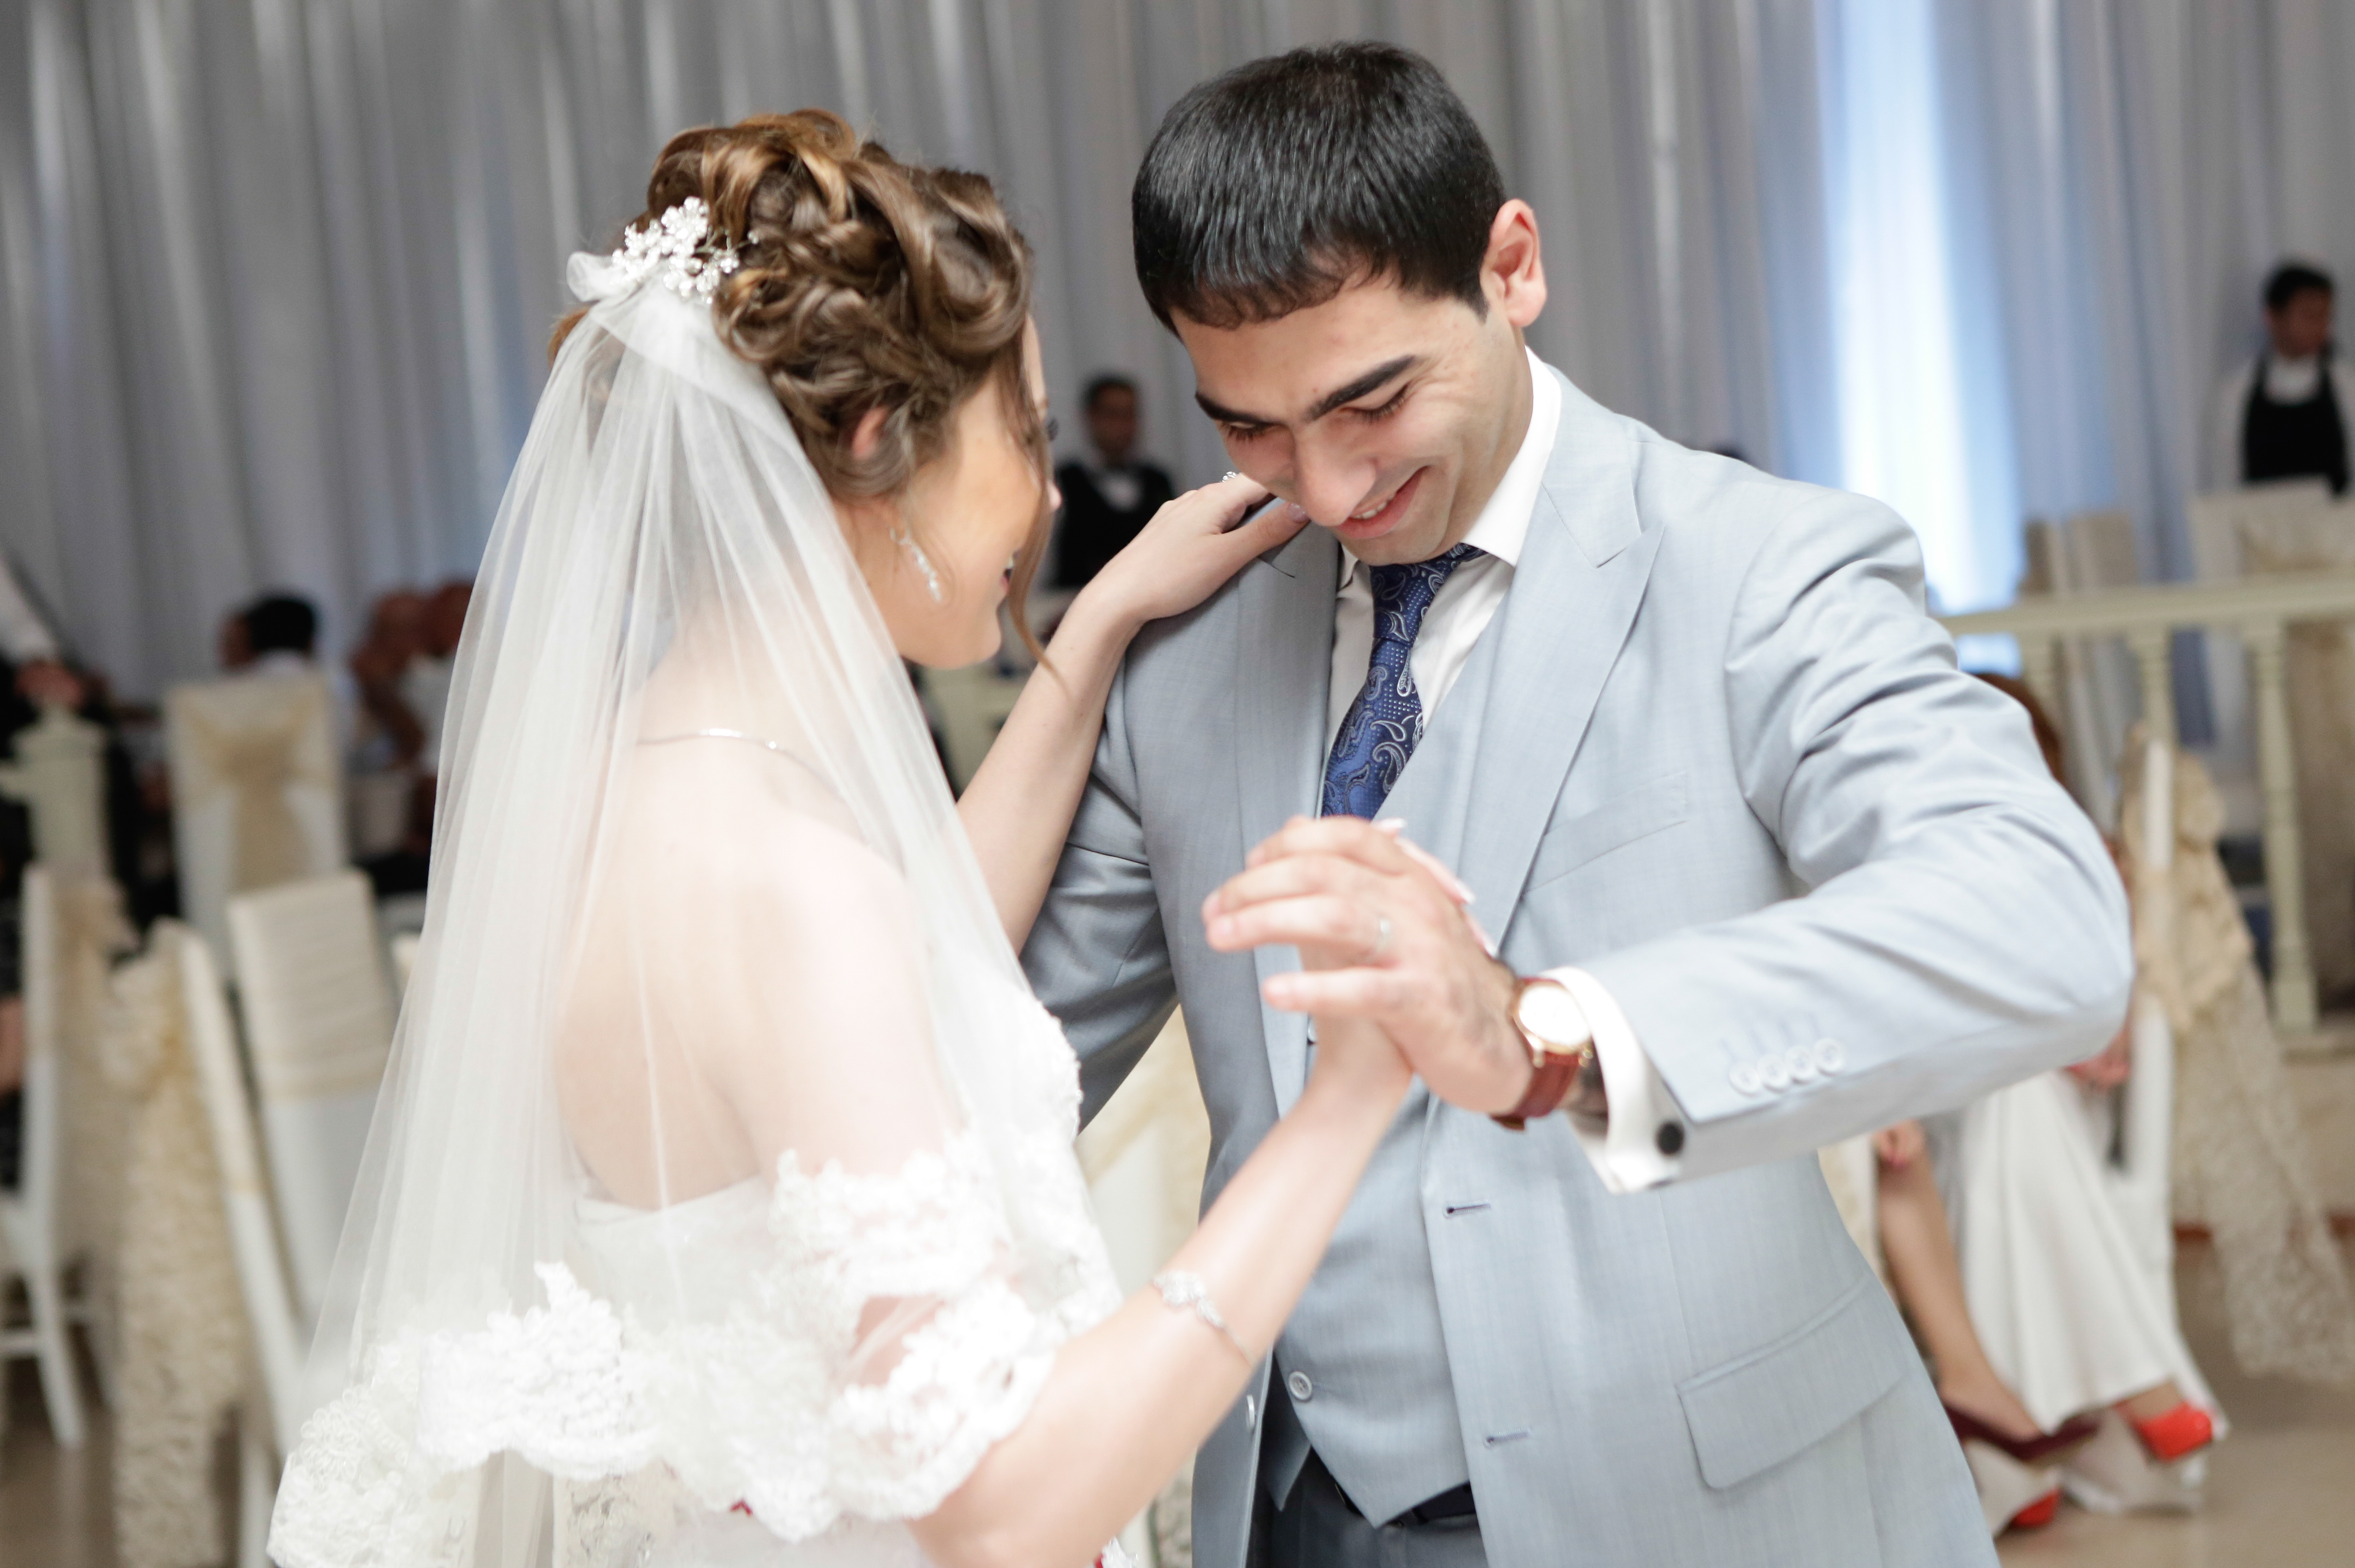 wedding dress cleaners business